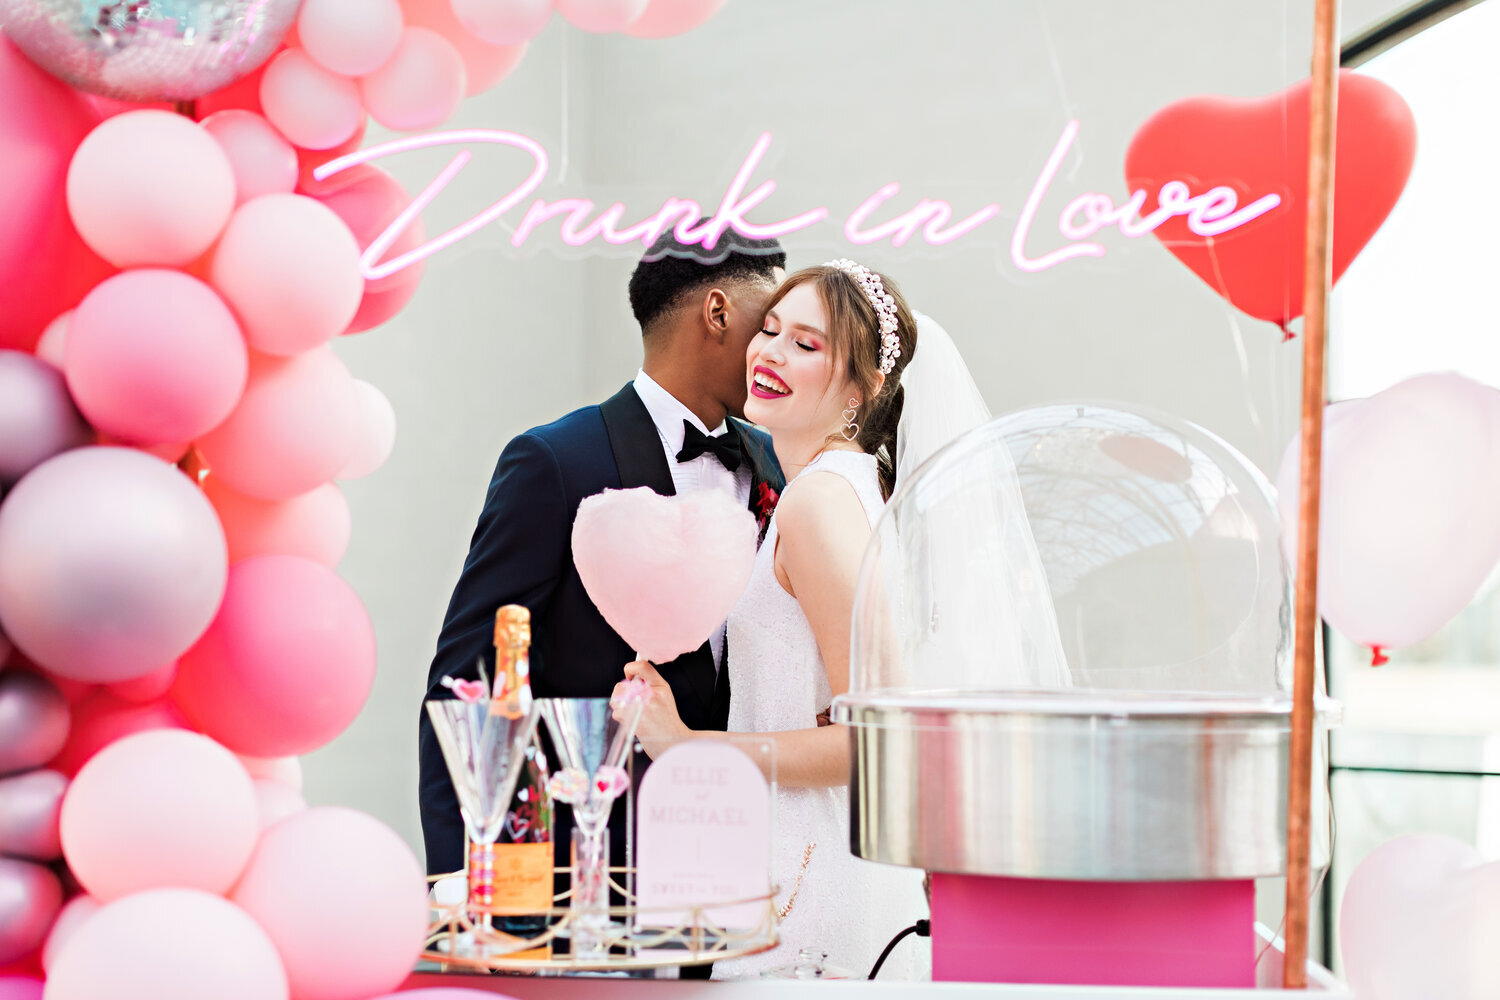 Styled shoot by Lovely Details. Desktop Image